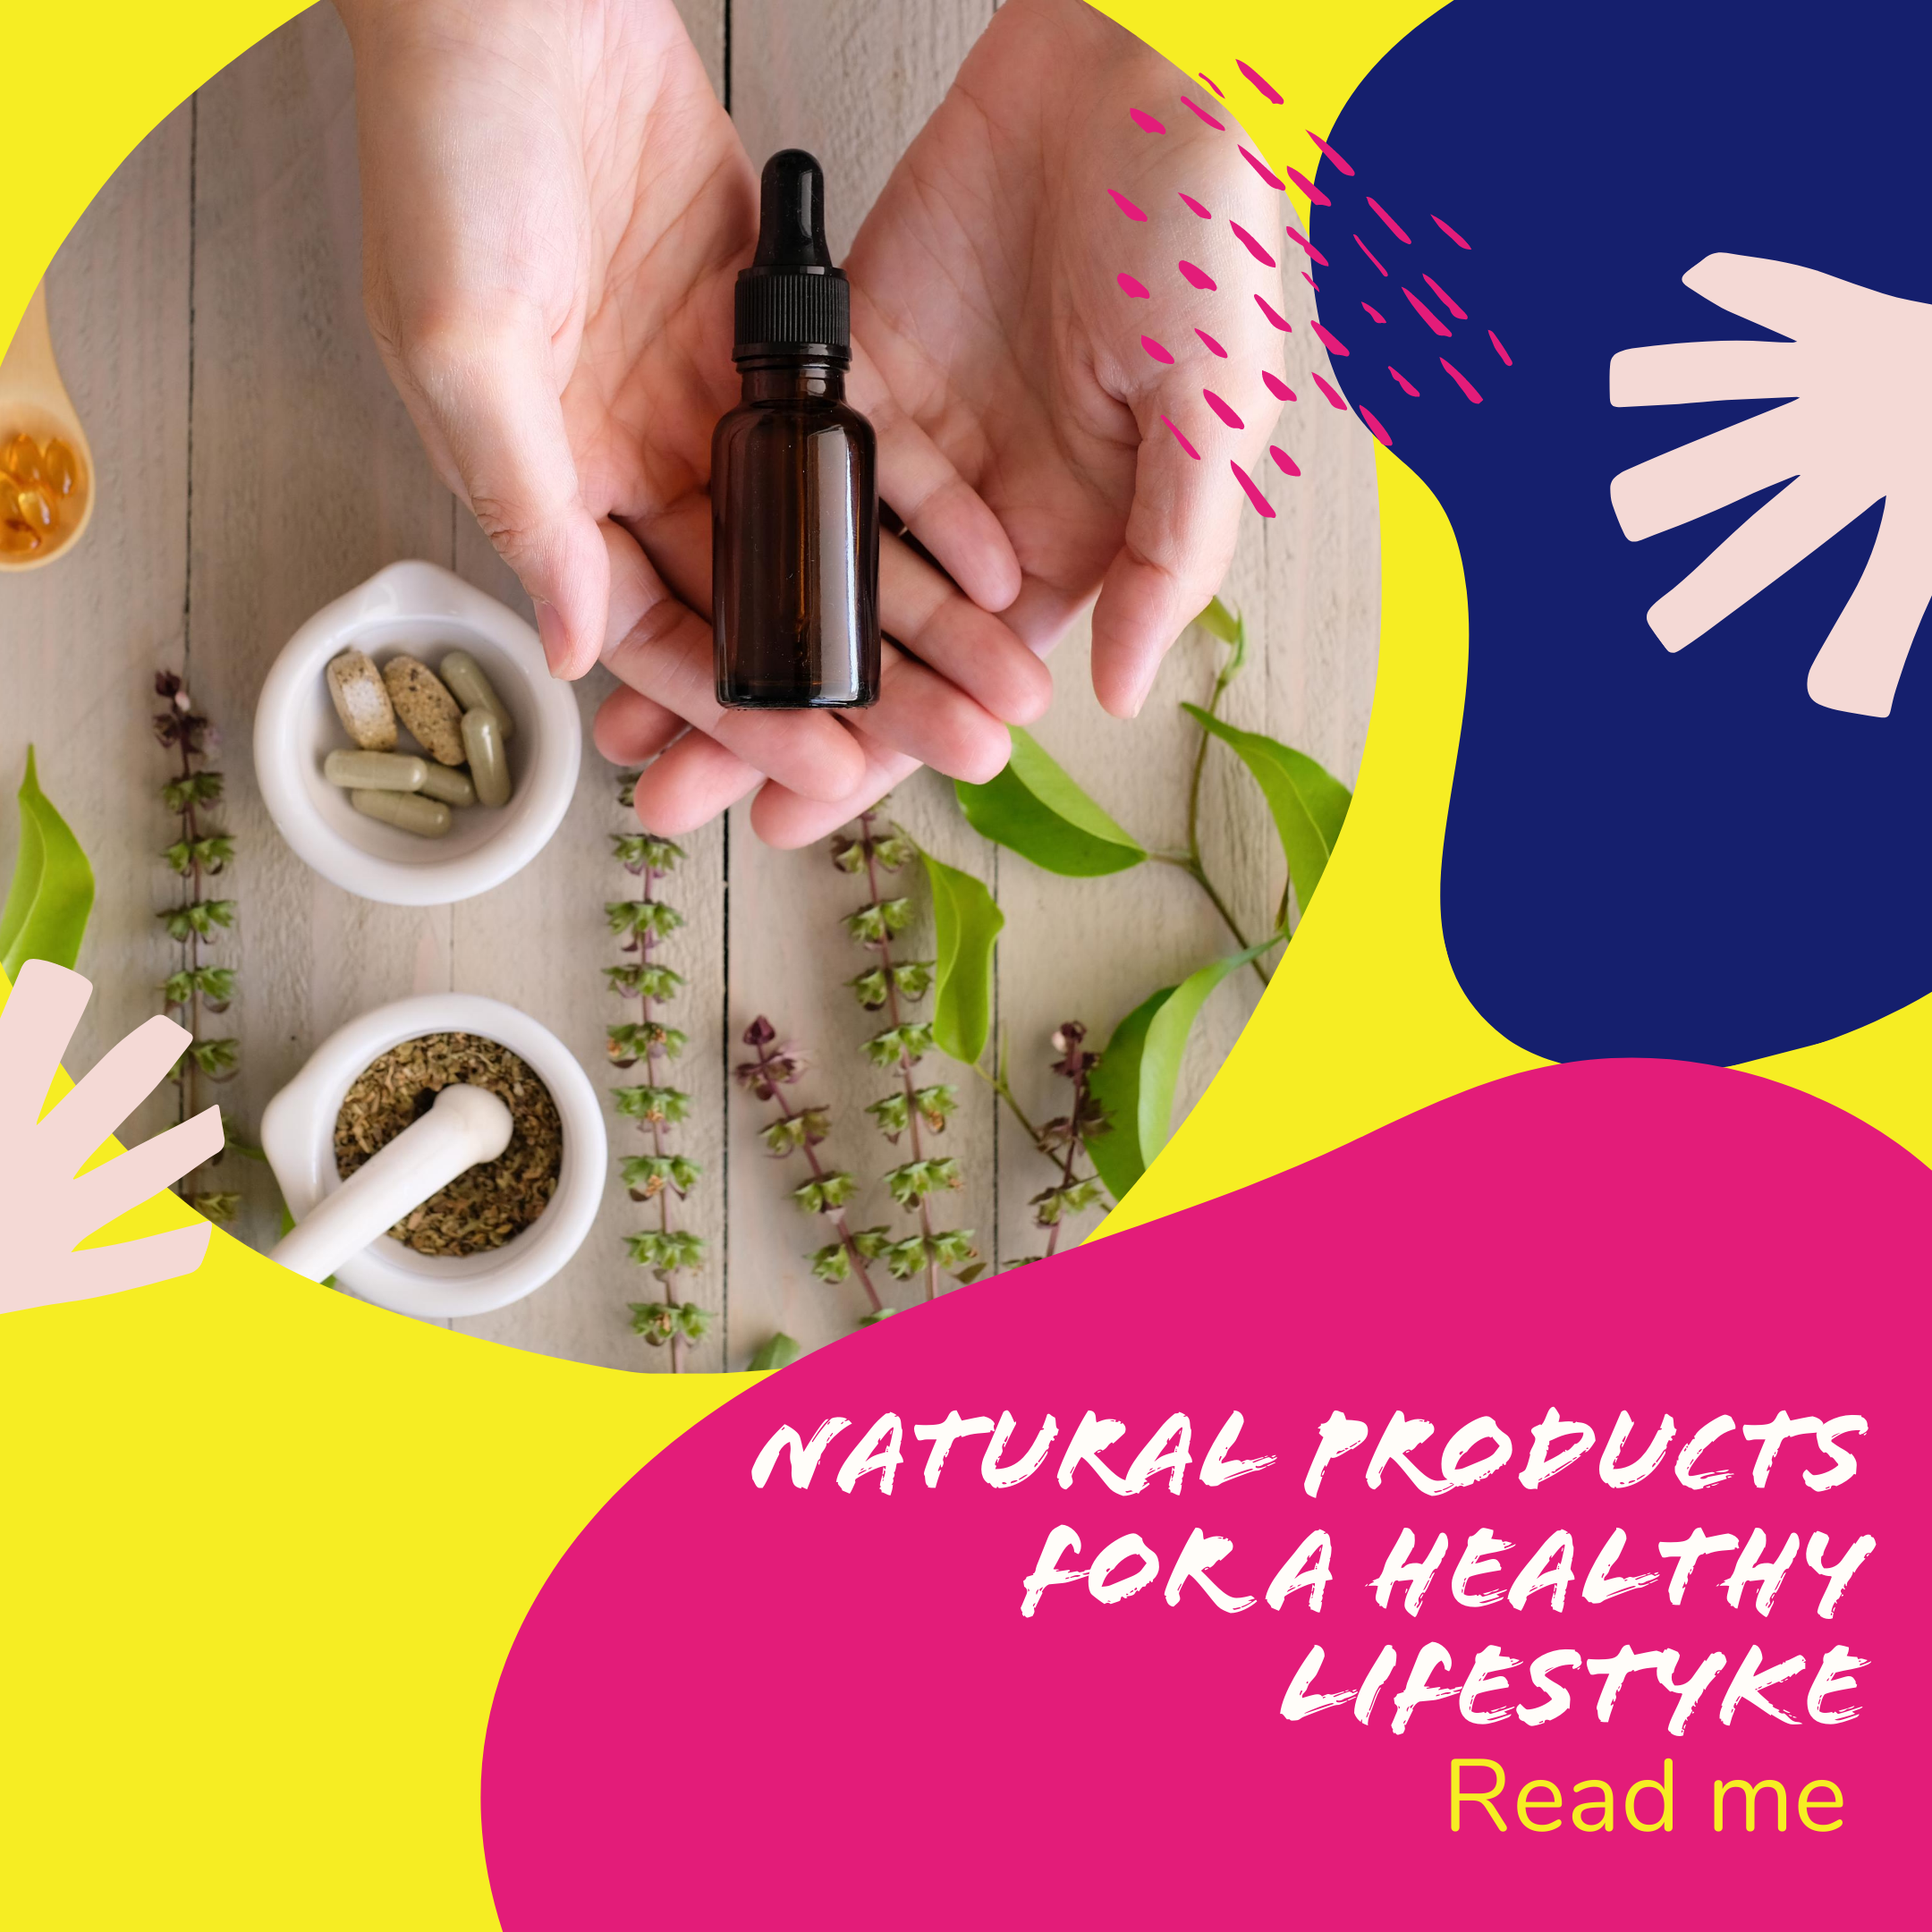 Natural Products For a Healthy Lifestyle